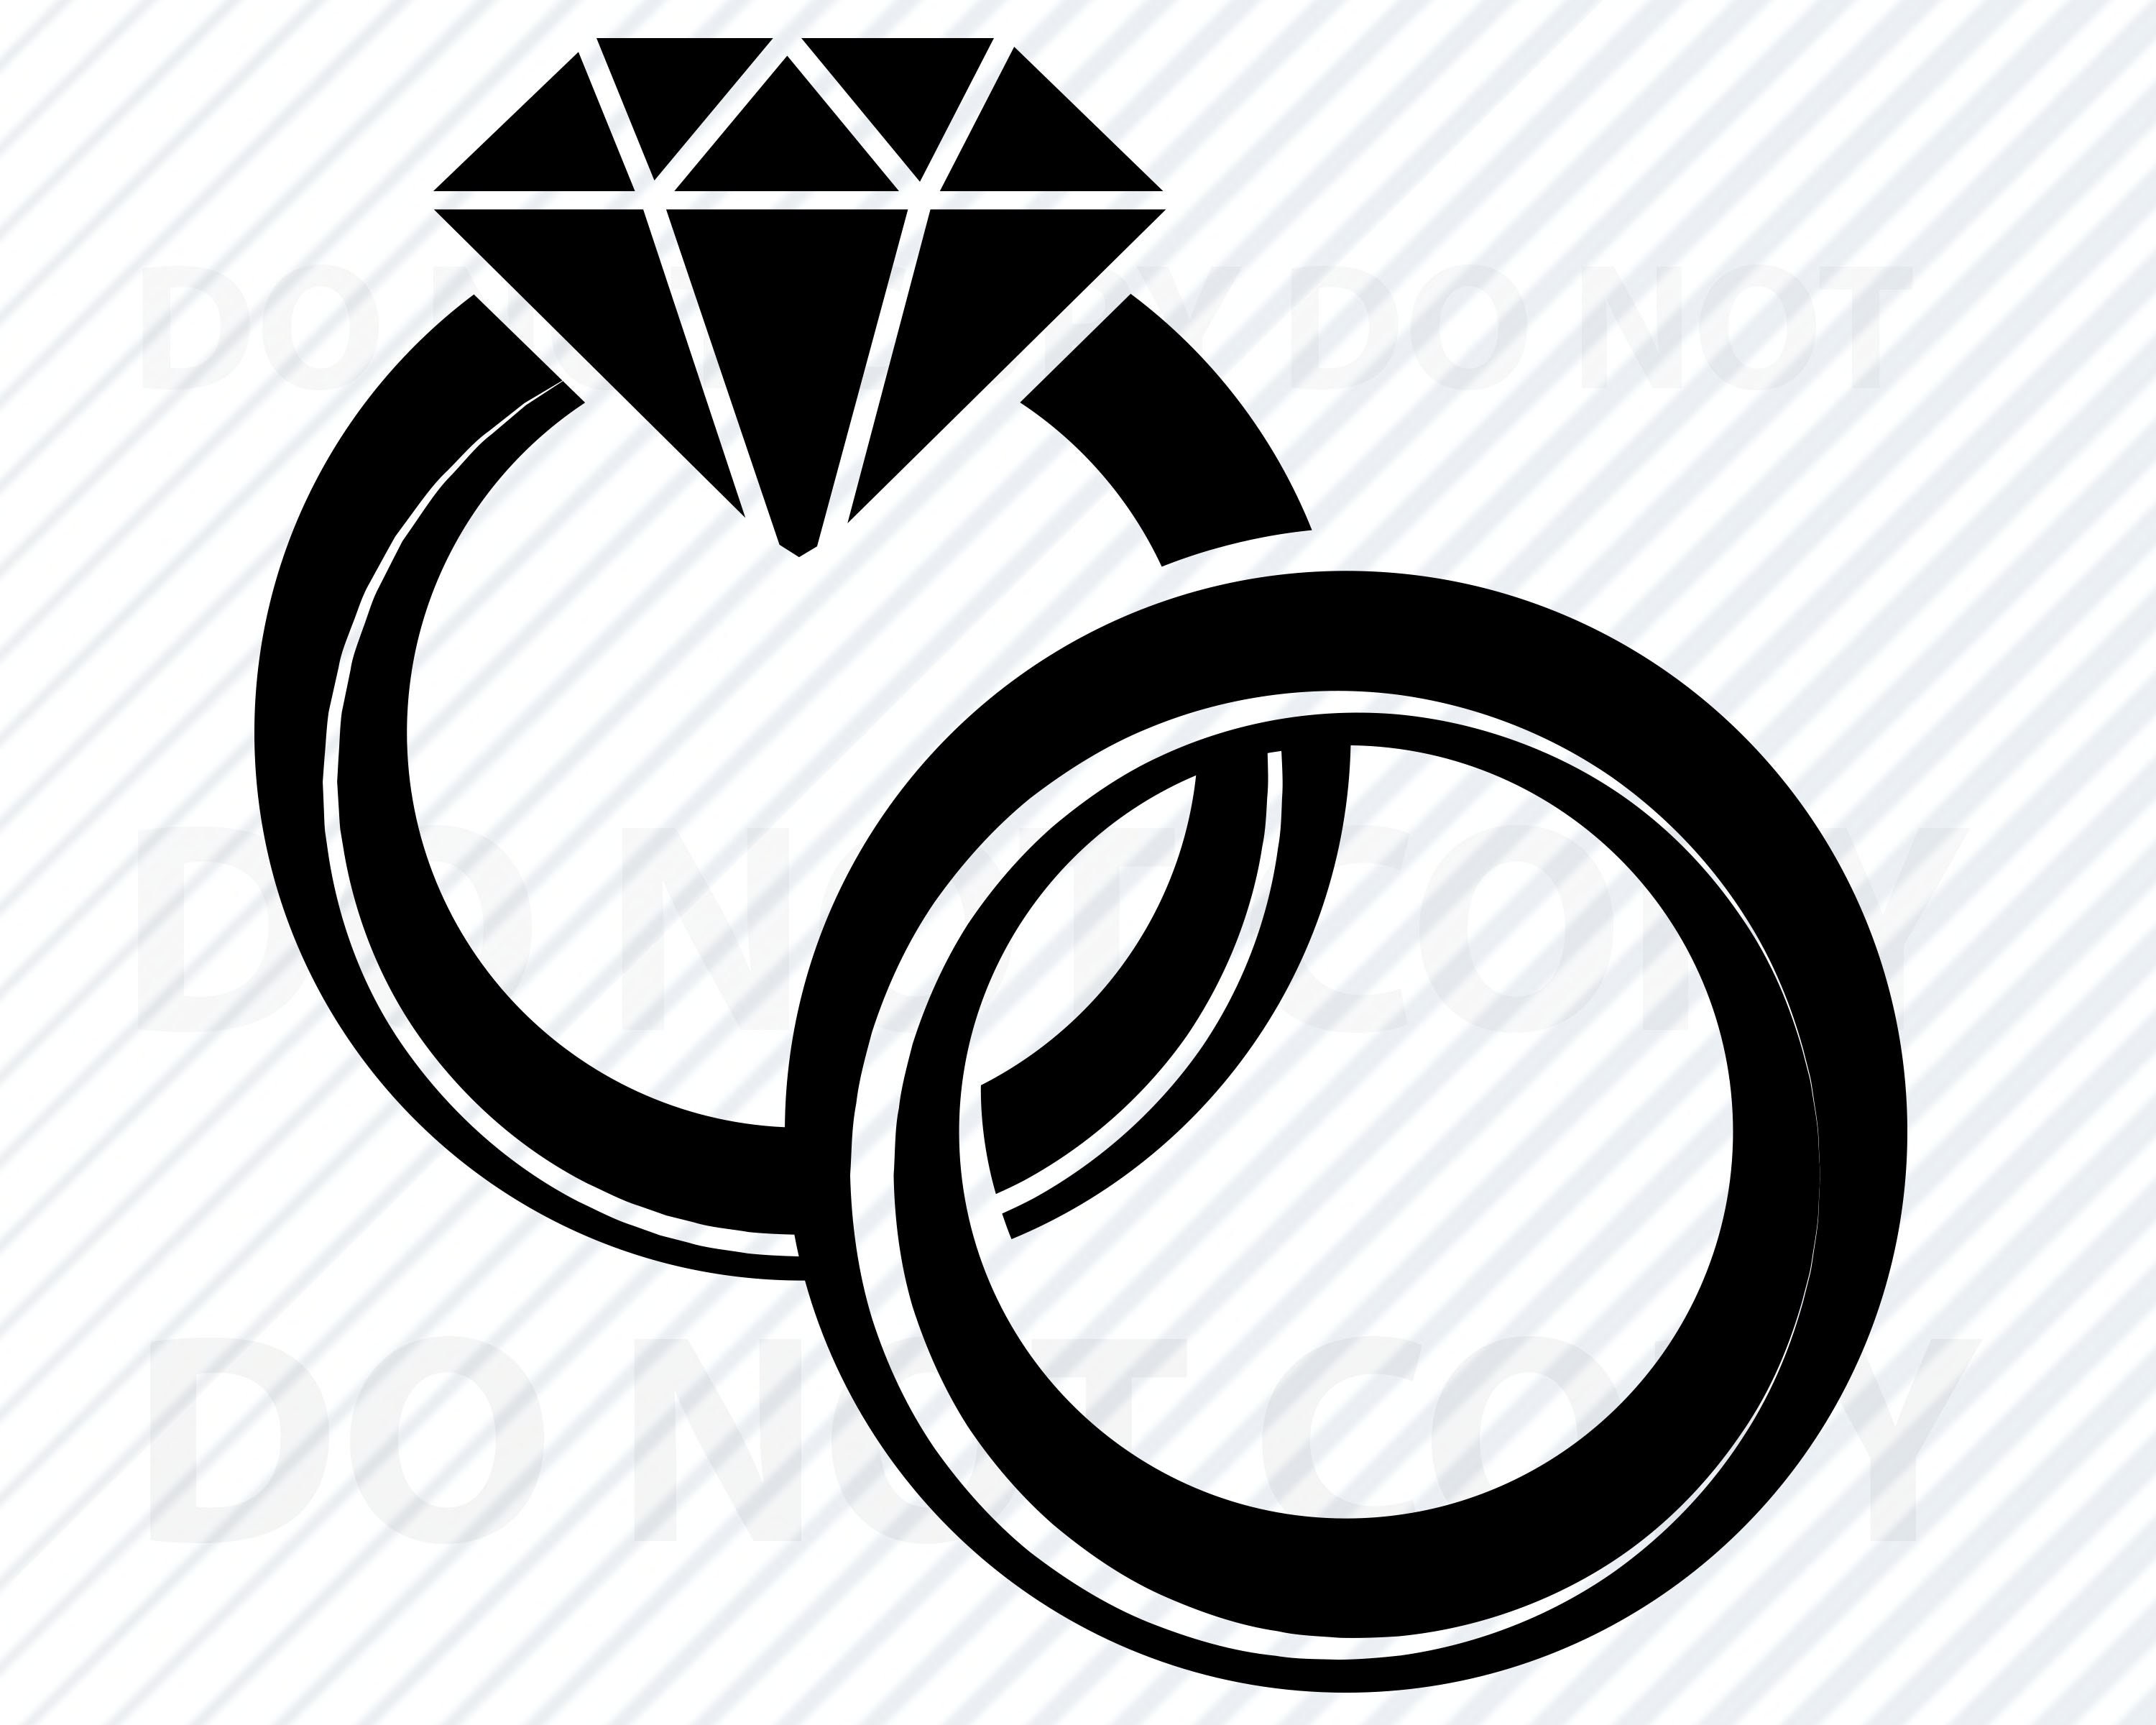 Download Wedding Ring SVG Files for Cricut Diamond RIng Vector Images | Etsy